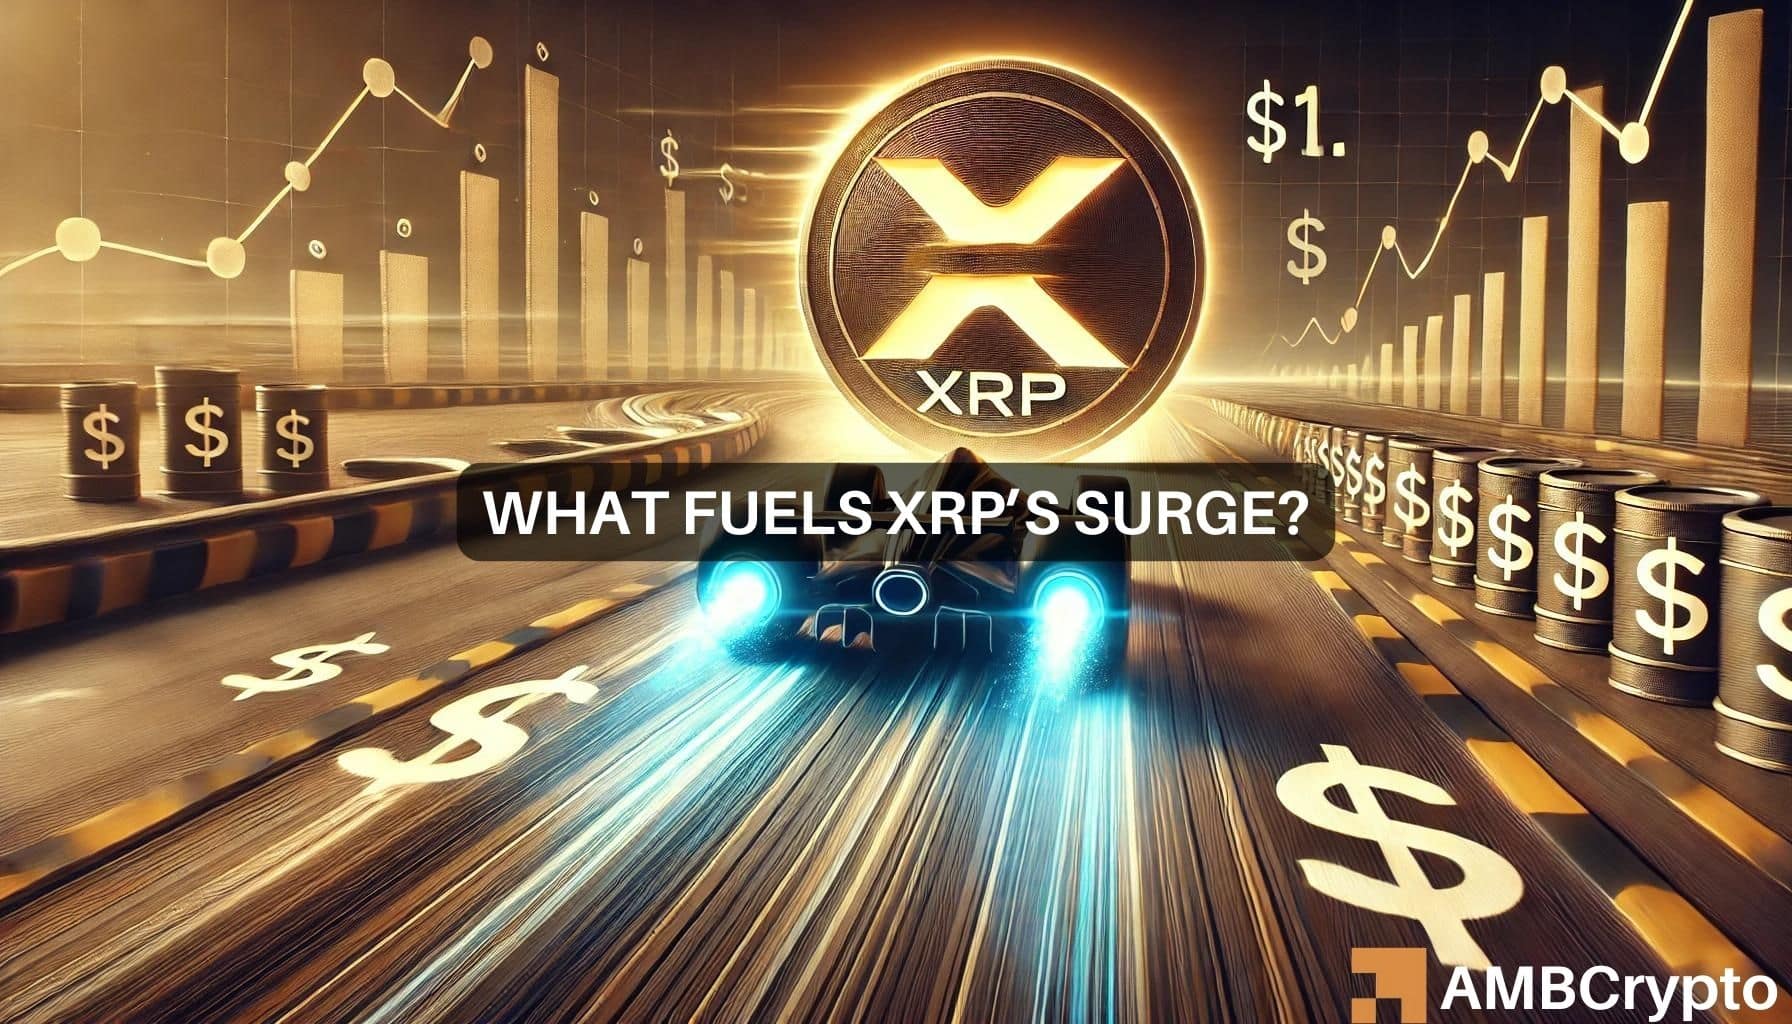 Could XRP hit $1 soon? Key indicators point to massive gains ahead